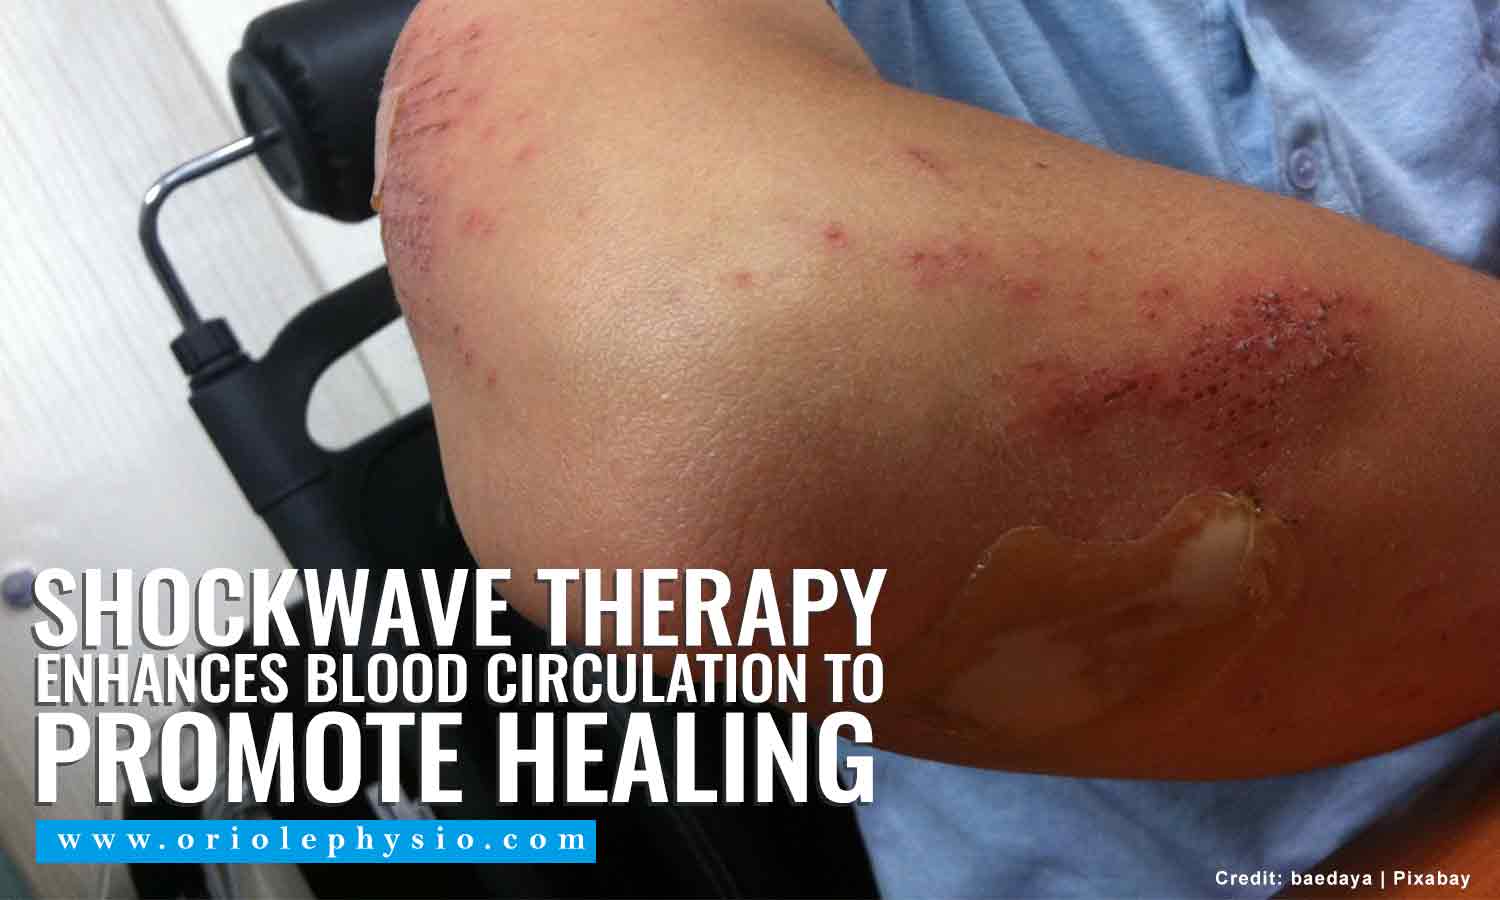 Shockwave therapy enhances blood circulation to promote healing